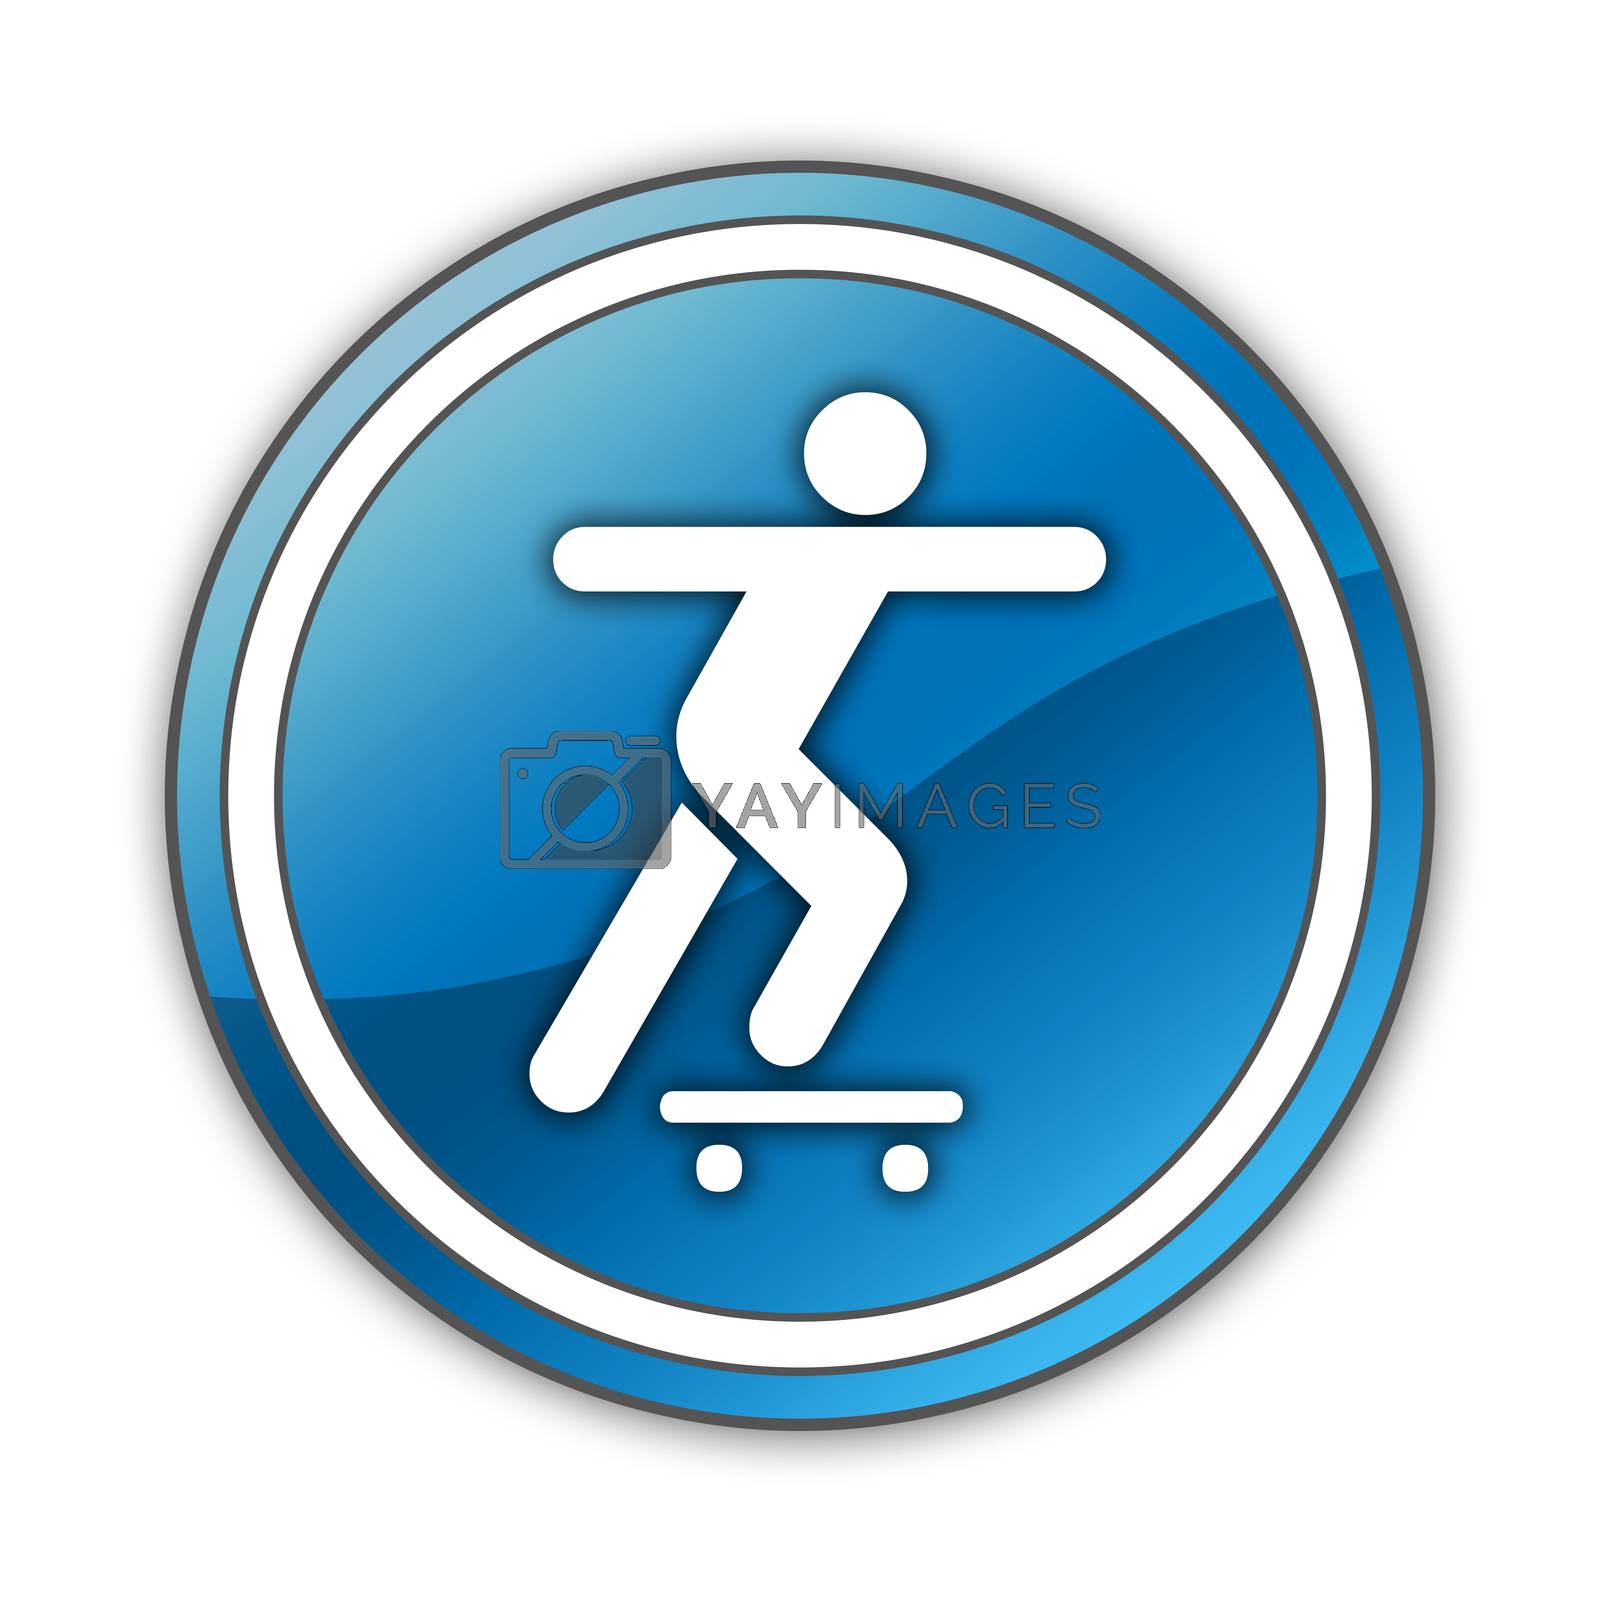 Royalty free image of Icon, Button, Pictogram Skateboarding by mindscanner